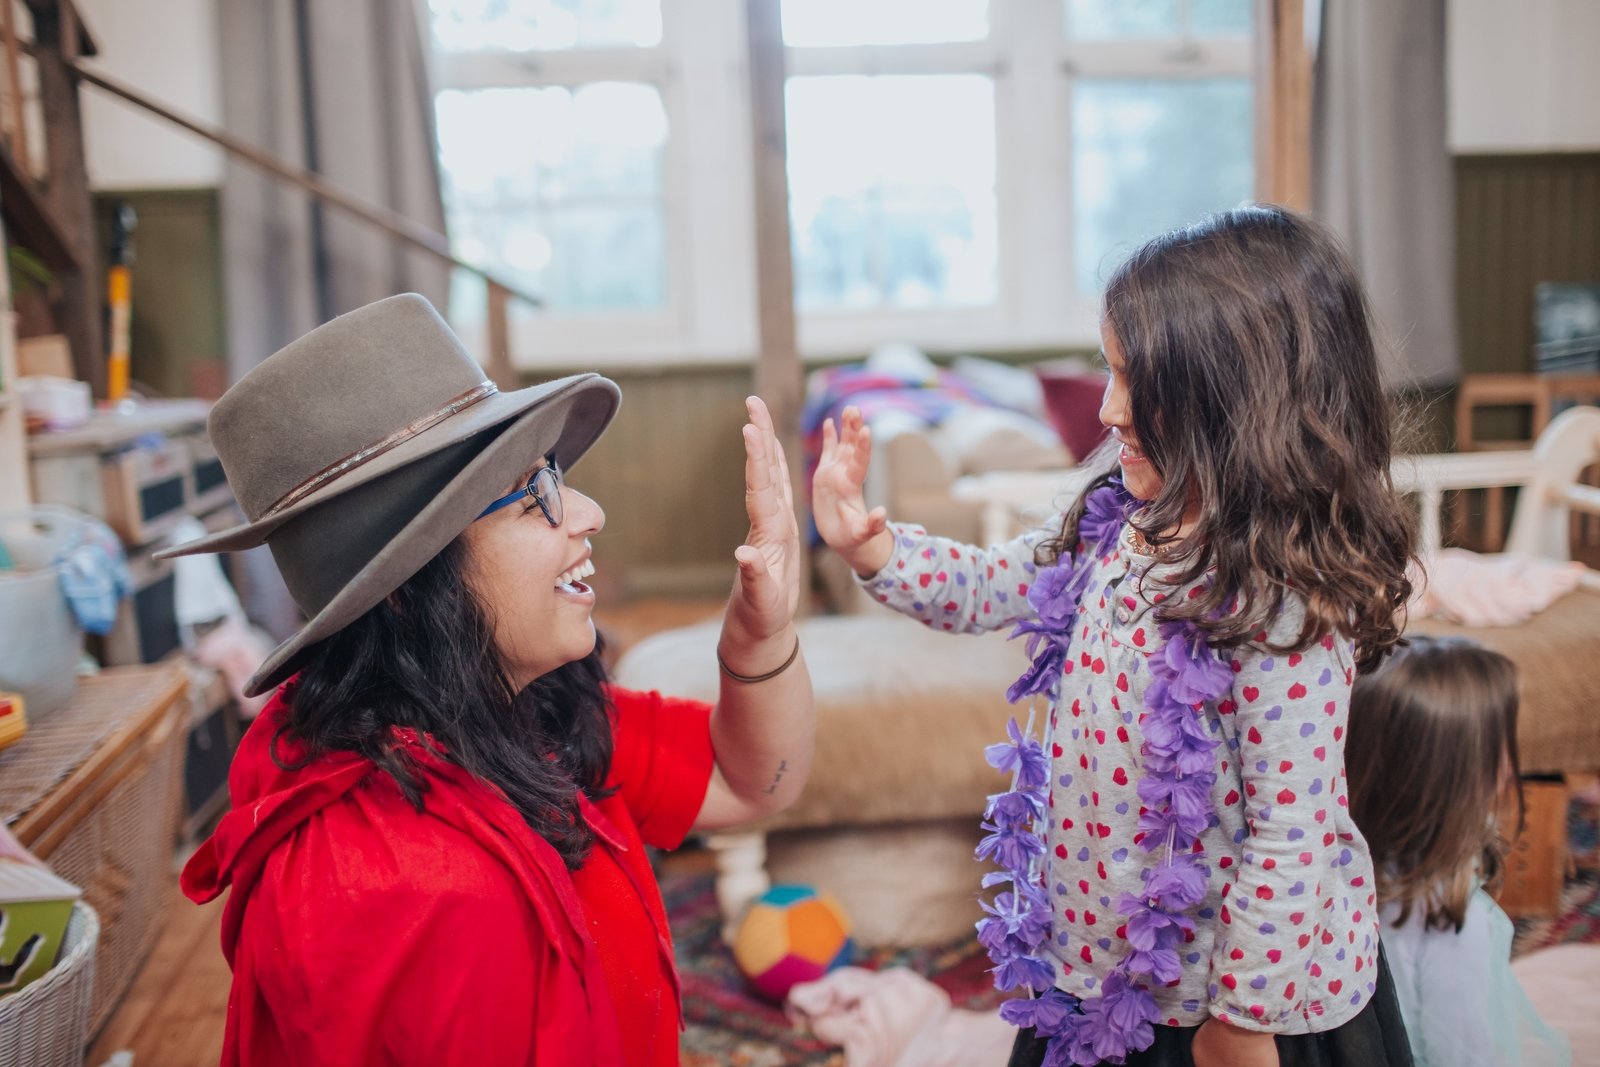 A mom and daughter dressed up in play costumes high-fiving in their living room